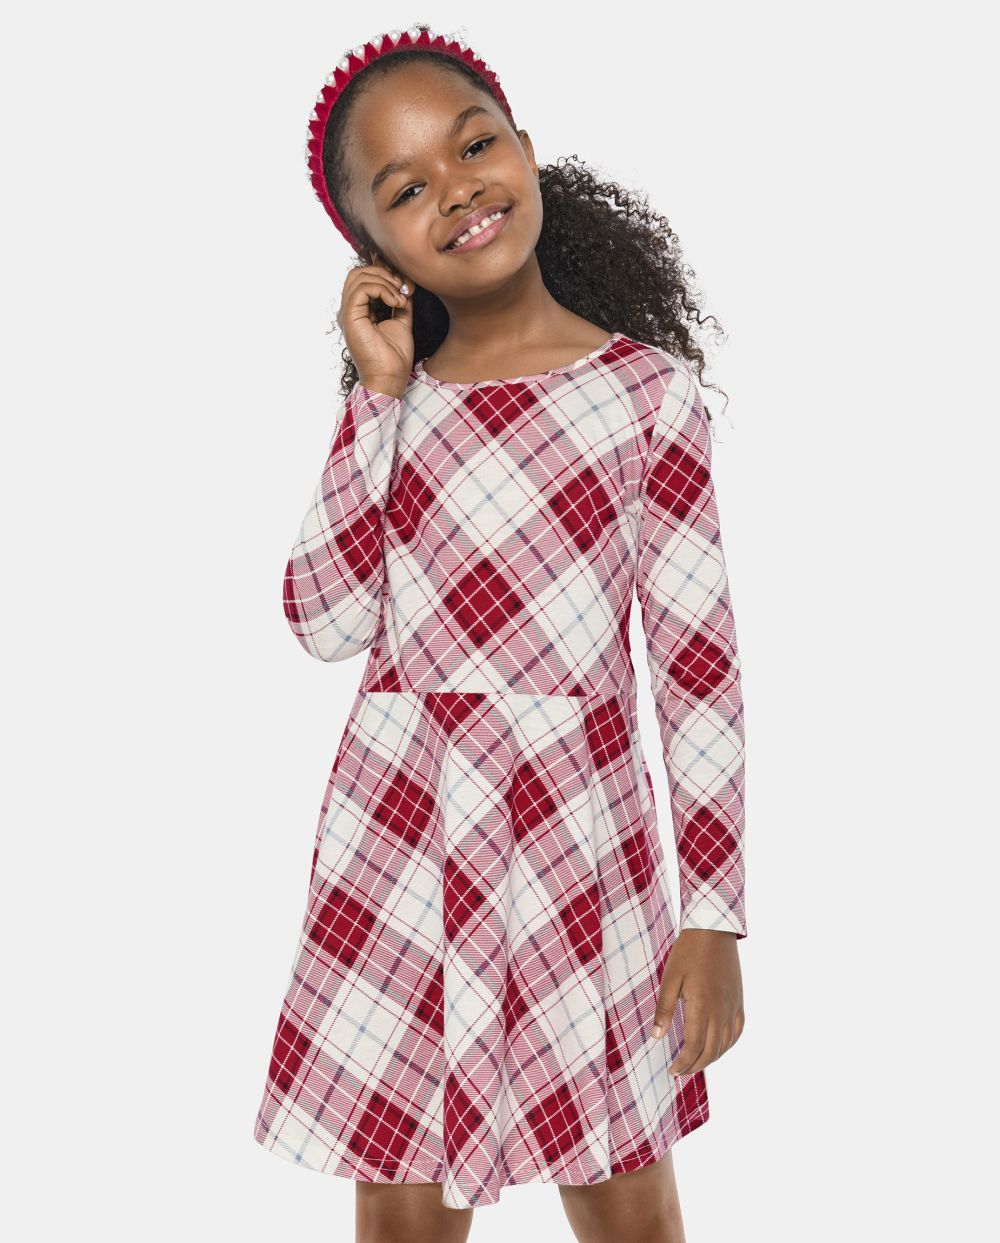 Girls Above the Knee Plaid Print Skater Dress by The Children Place